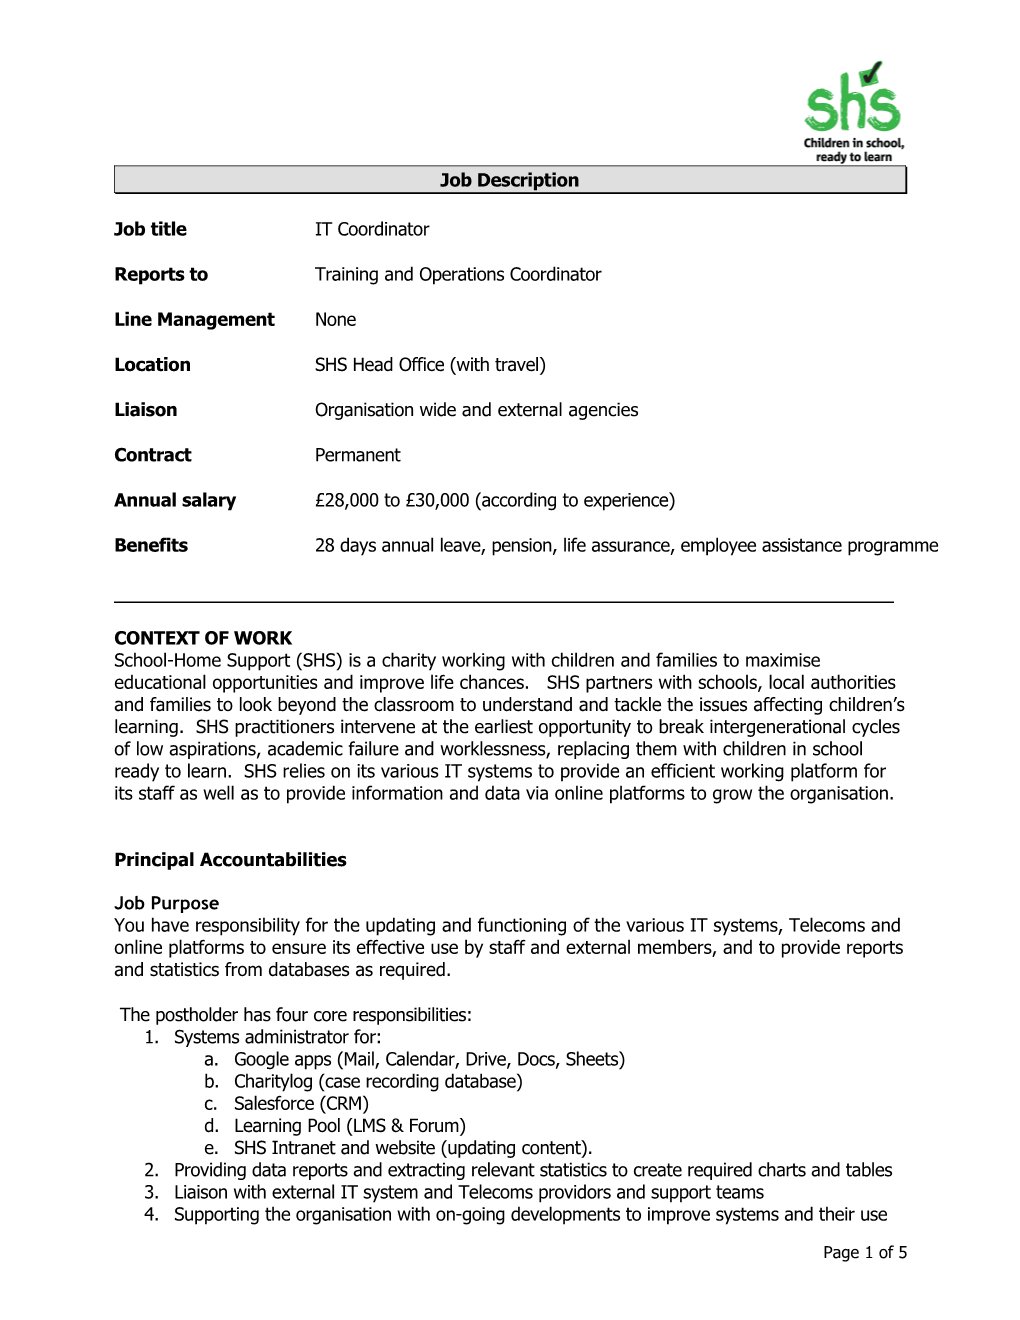 Reports Totraining and Operations Coordinator